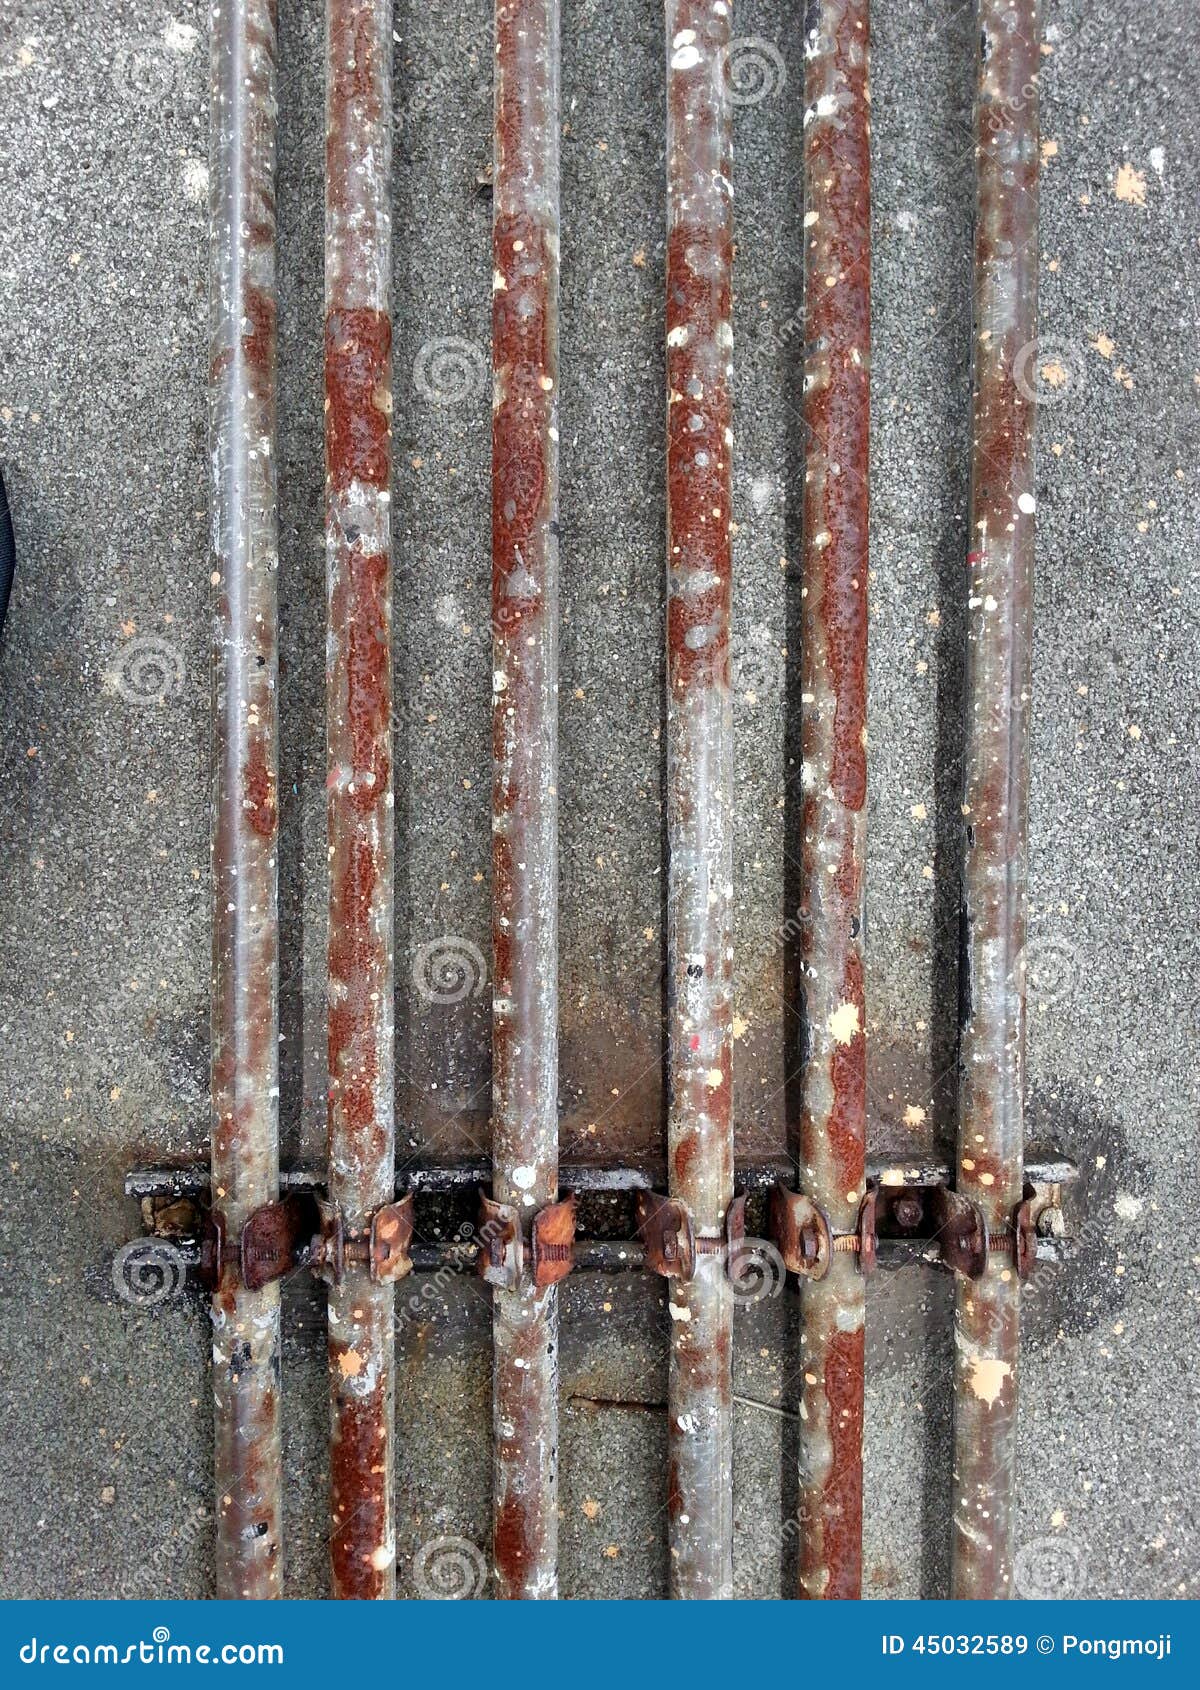 Pipe And Rust Texture Stock Image Image Of Material 45032589 - rust texture roblox